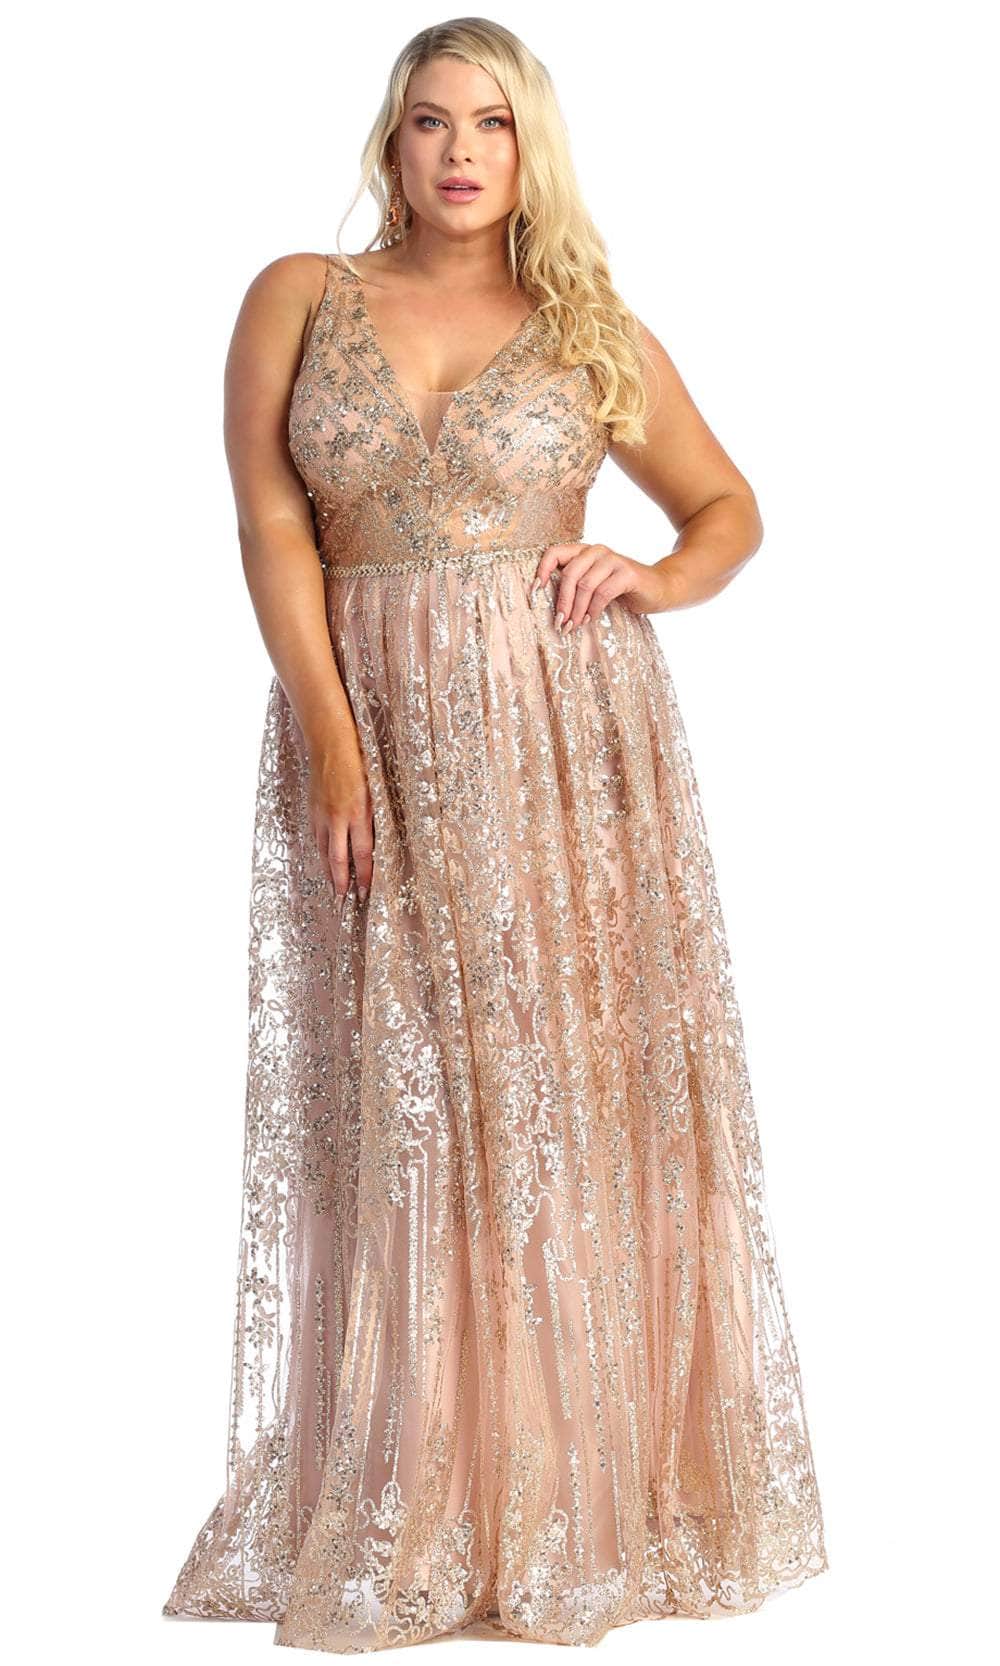 May Queen RQ7948 - Embroidered Illusion Bodice Dress
